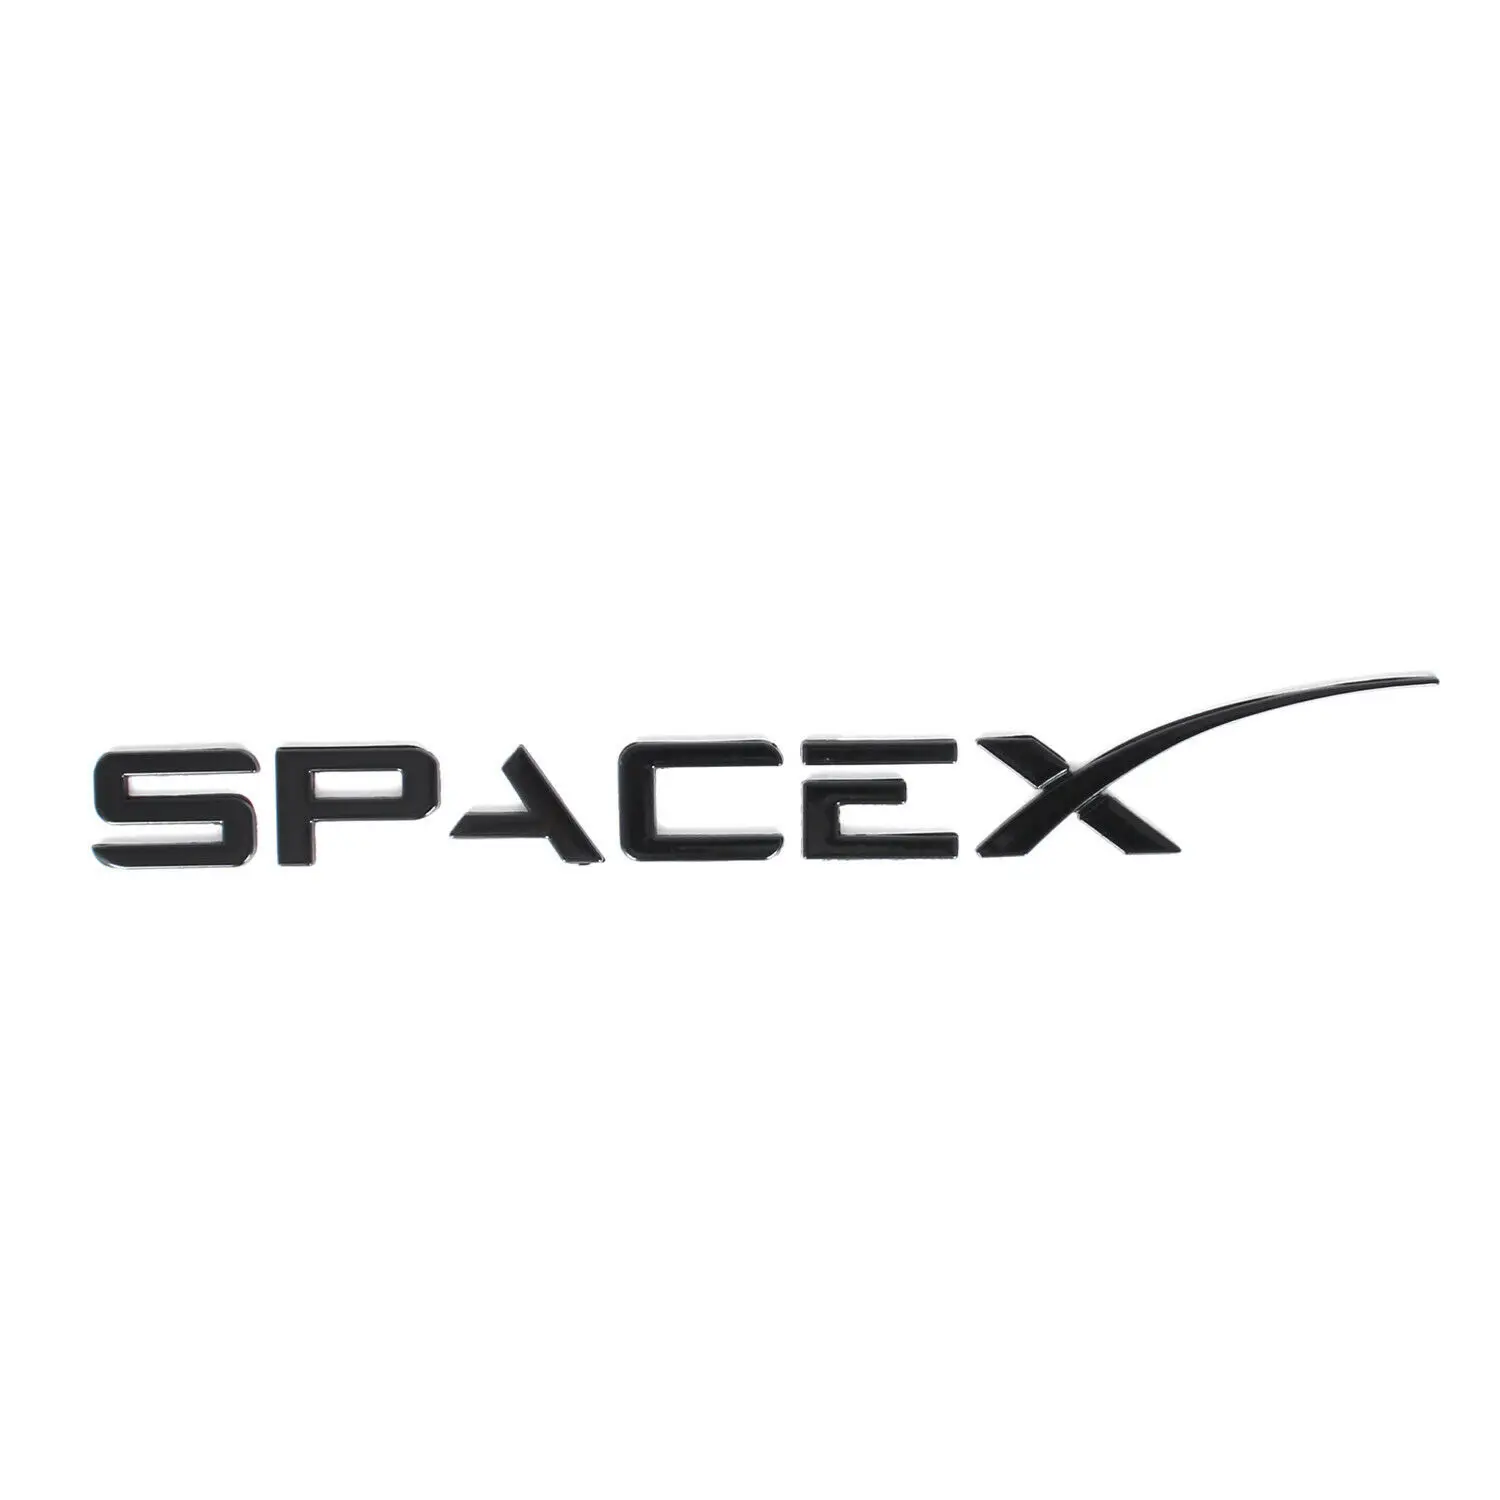 

1pc Glossy Black Spacex Sticker Badge Car Trunk Rear Lid Emblem for Tesla Model 3 S X Y Assessoires Decal